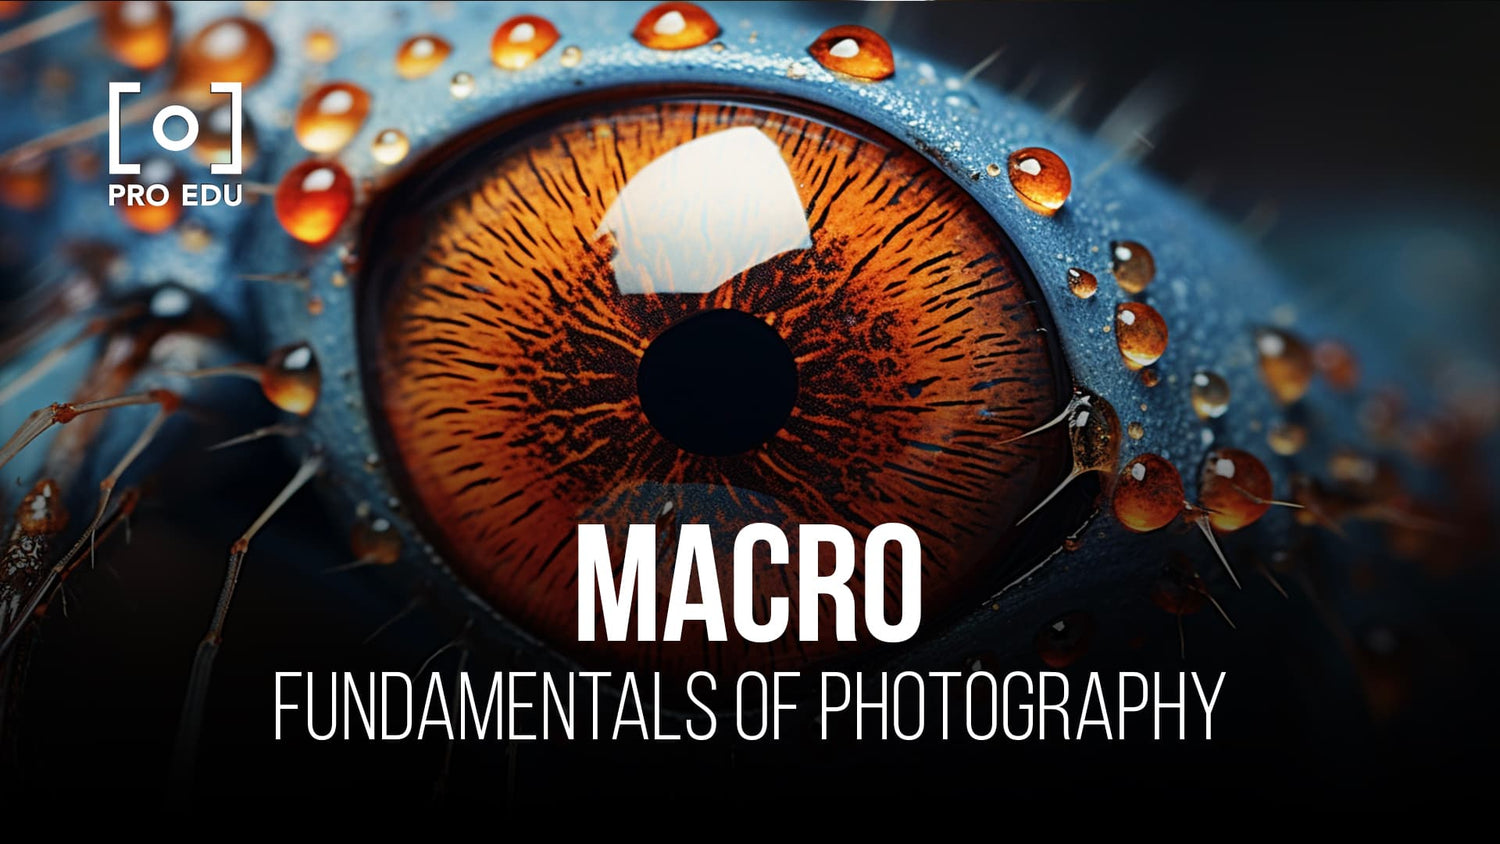 A closer look at the world through macro photography techniques